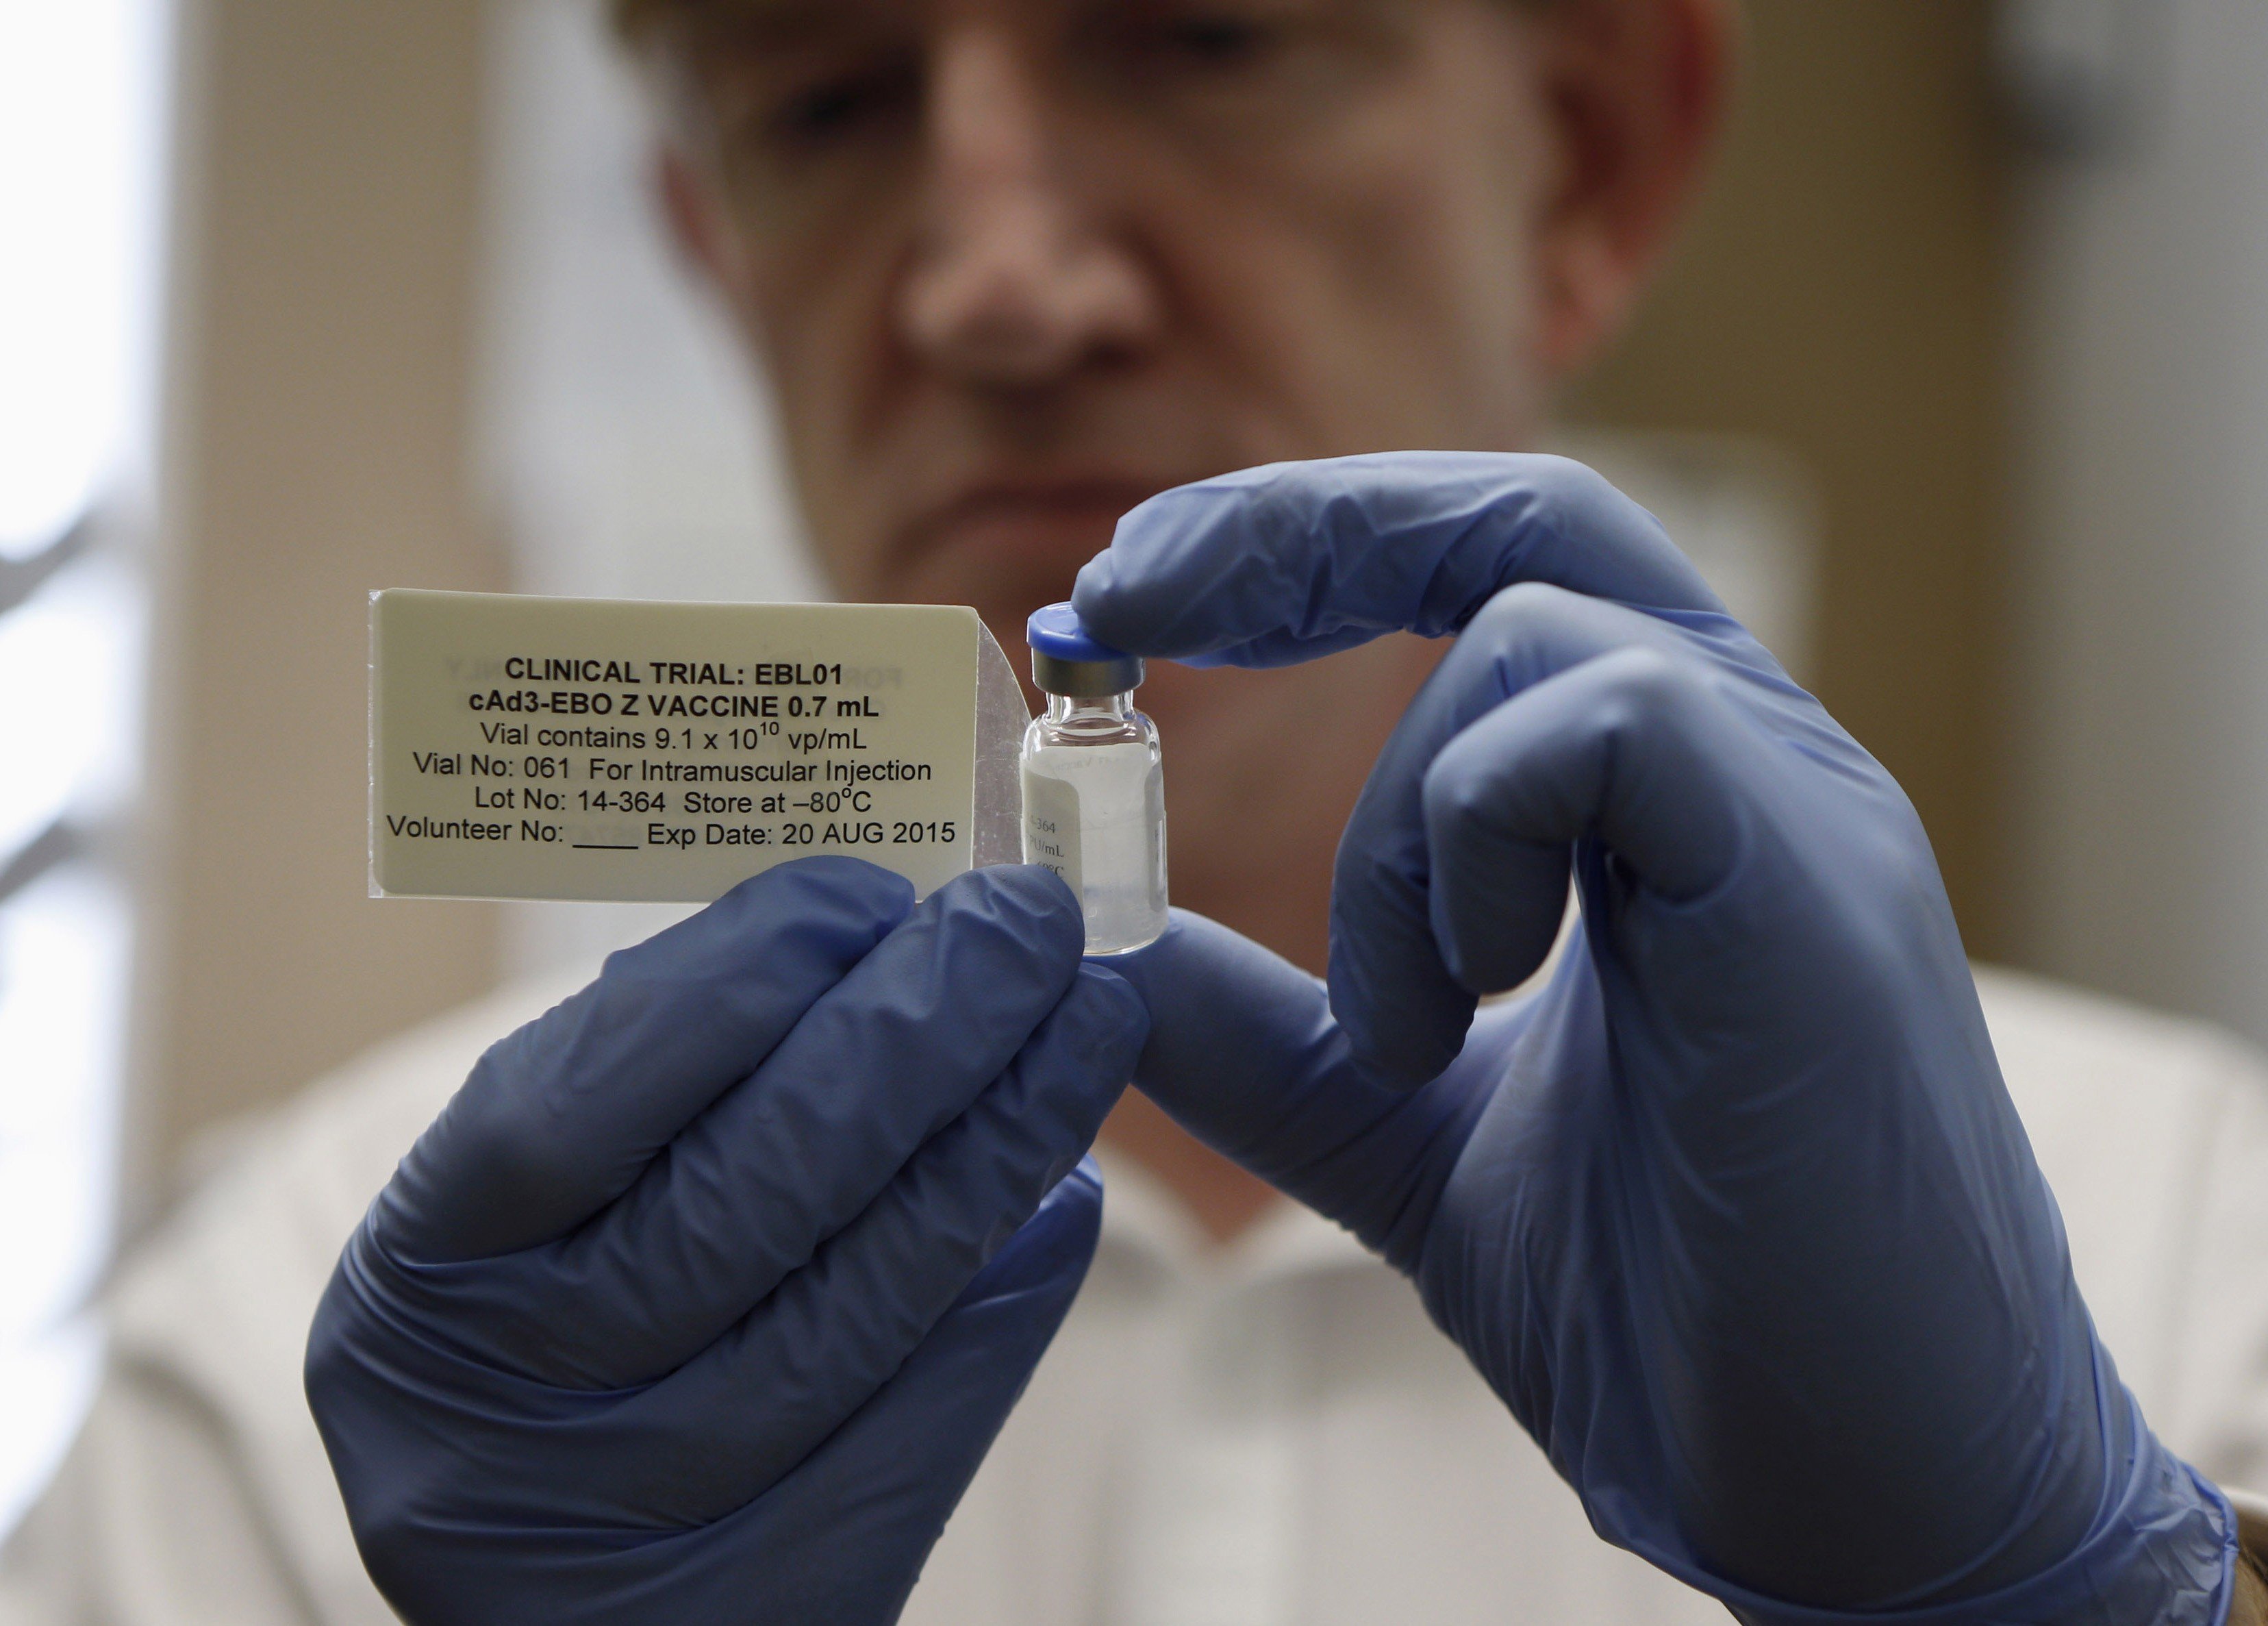 Professor Adrian Hill, director of the Jenner Institute and chief investigator of the trials, holds a vial containing the Ebola vaccine at the Oxford Vaccine Group Centre for Clinical Vaccinology and Tropical Medicine in Oxford, southern England, on Sept. 17, 2014 (Steve Parsons—Reuters)